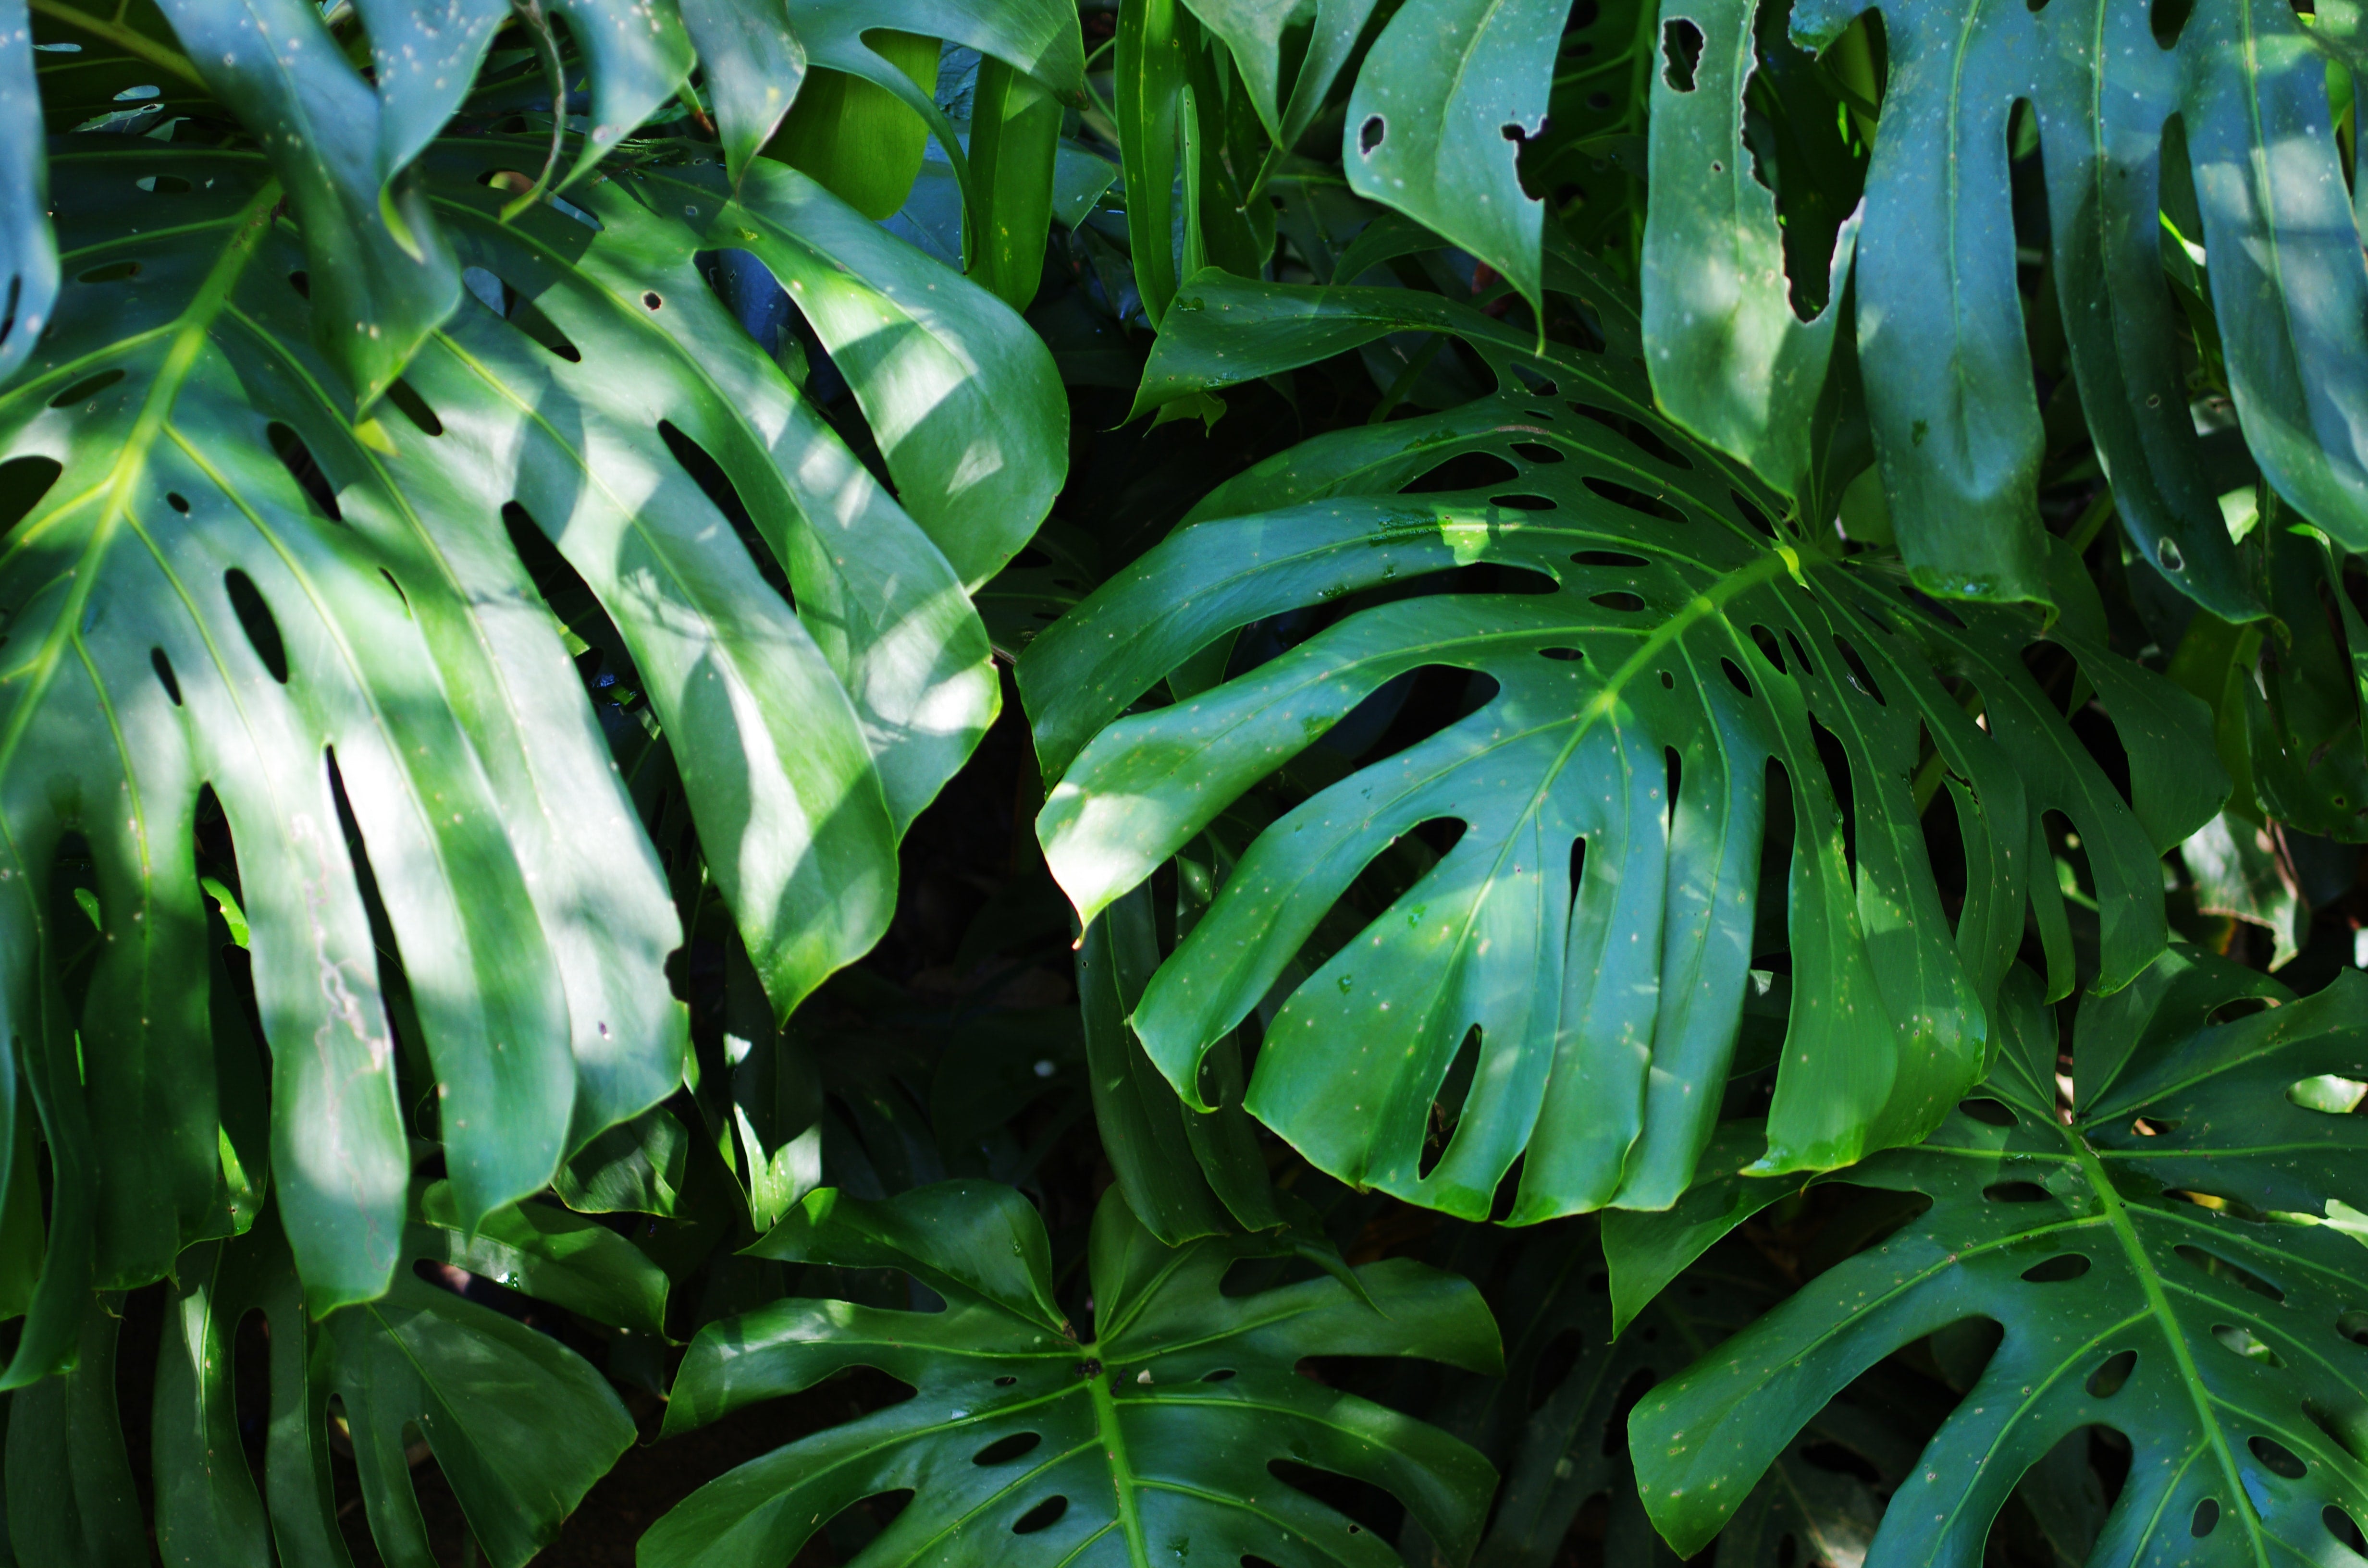 Cuttings: How do you propagate a Monstera plant?